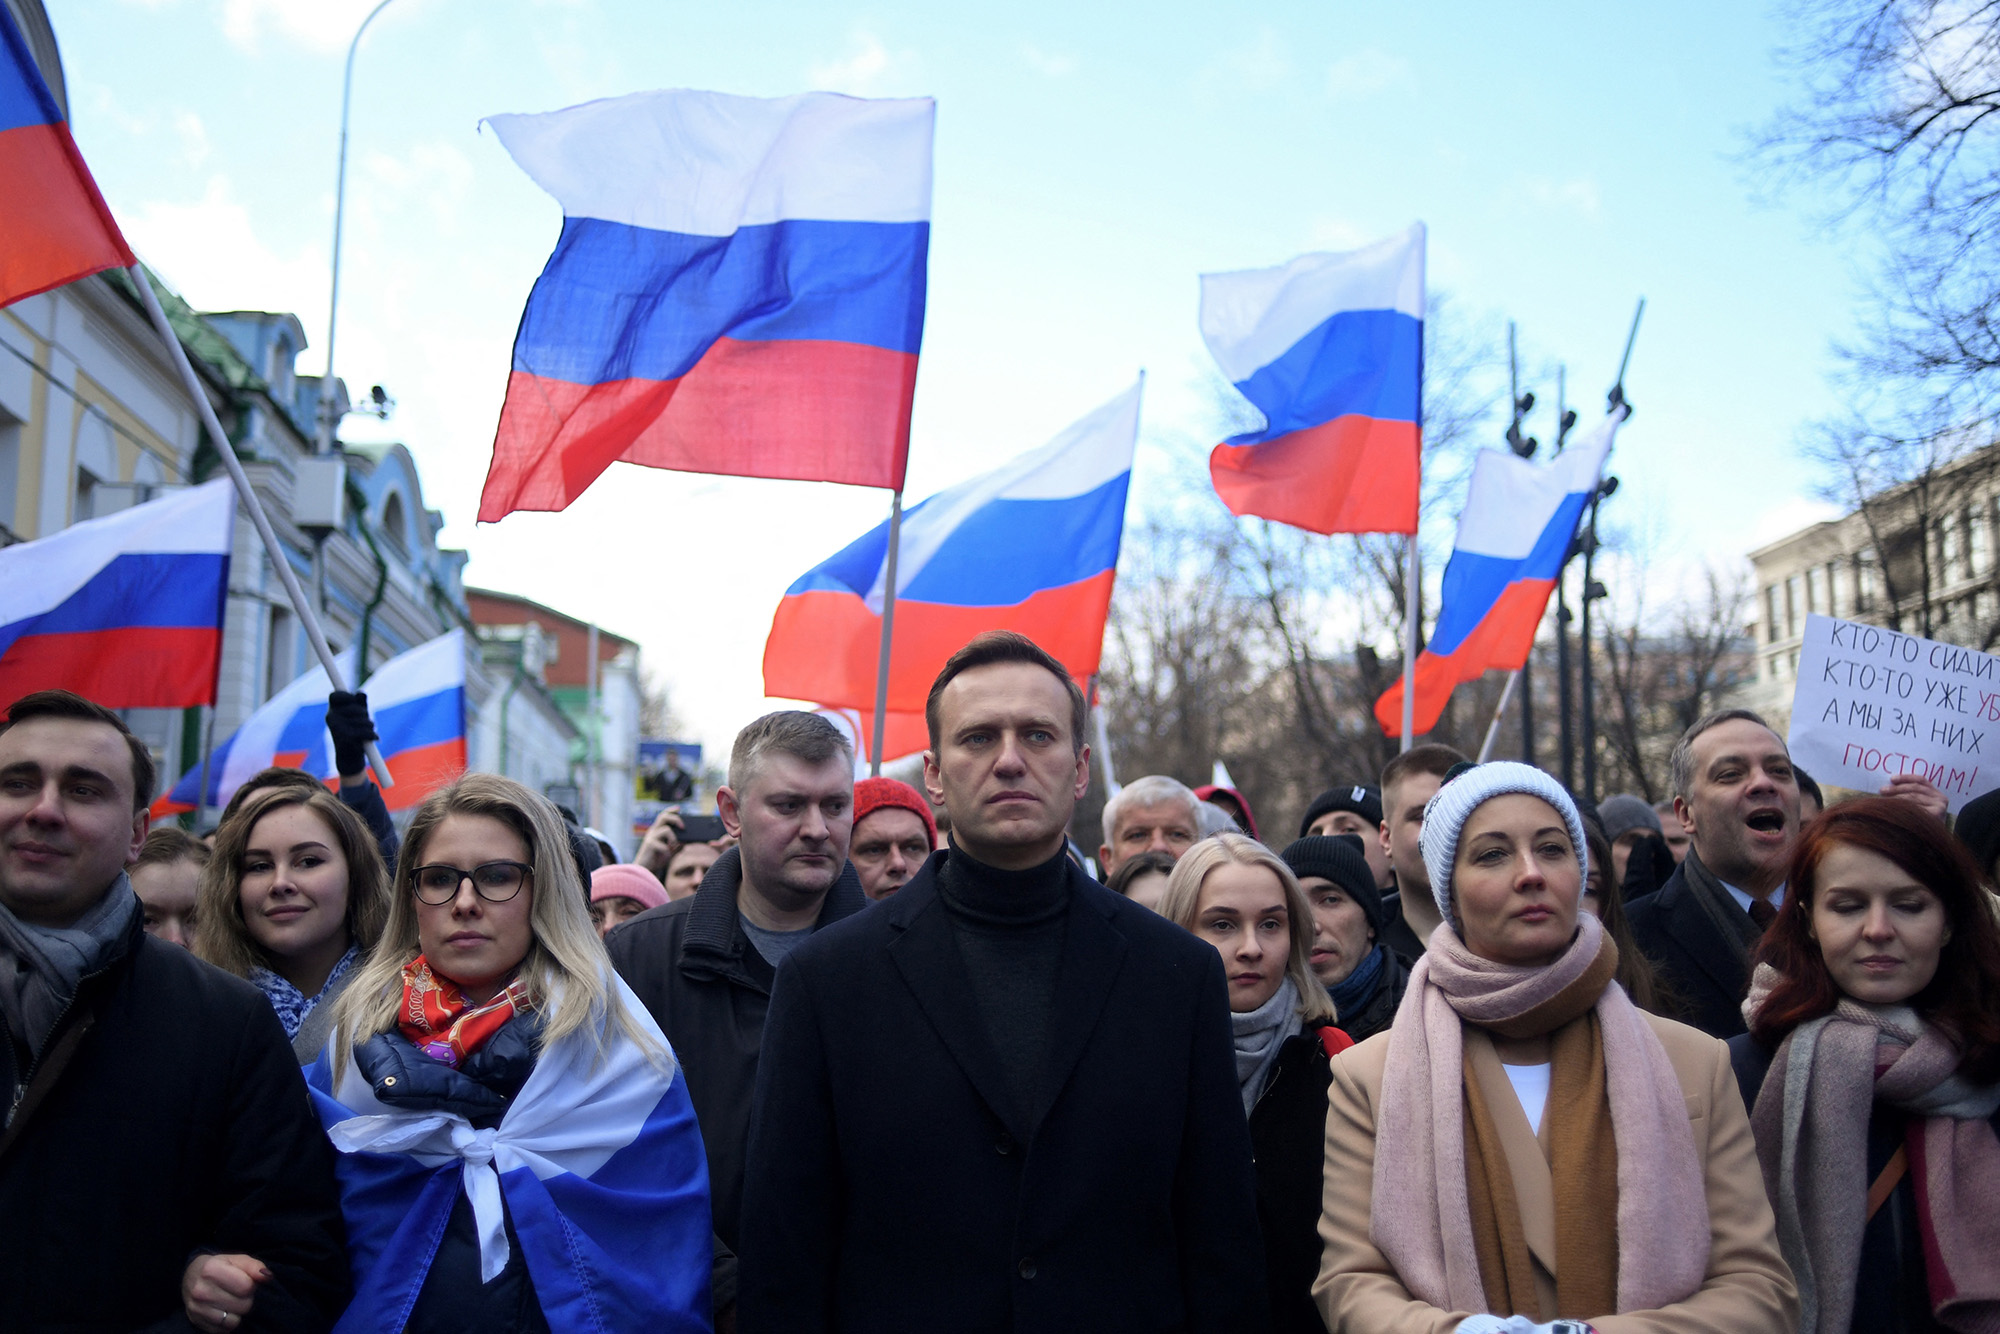 Alexey Navalny, center, his wife Yulia, center right, and other demonstrators march in memory of murdered Kremlin critic Boris Nemtsov in downtown Moscow, Russia, on February 29, 2020. 